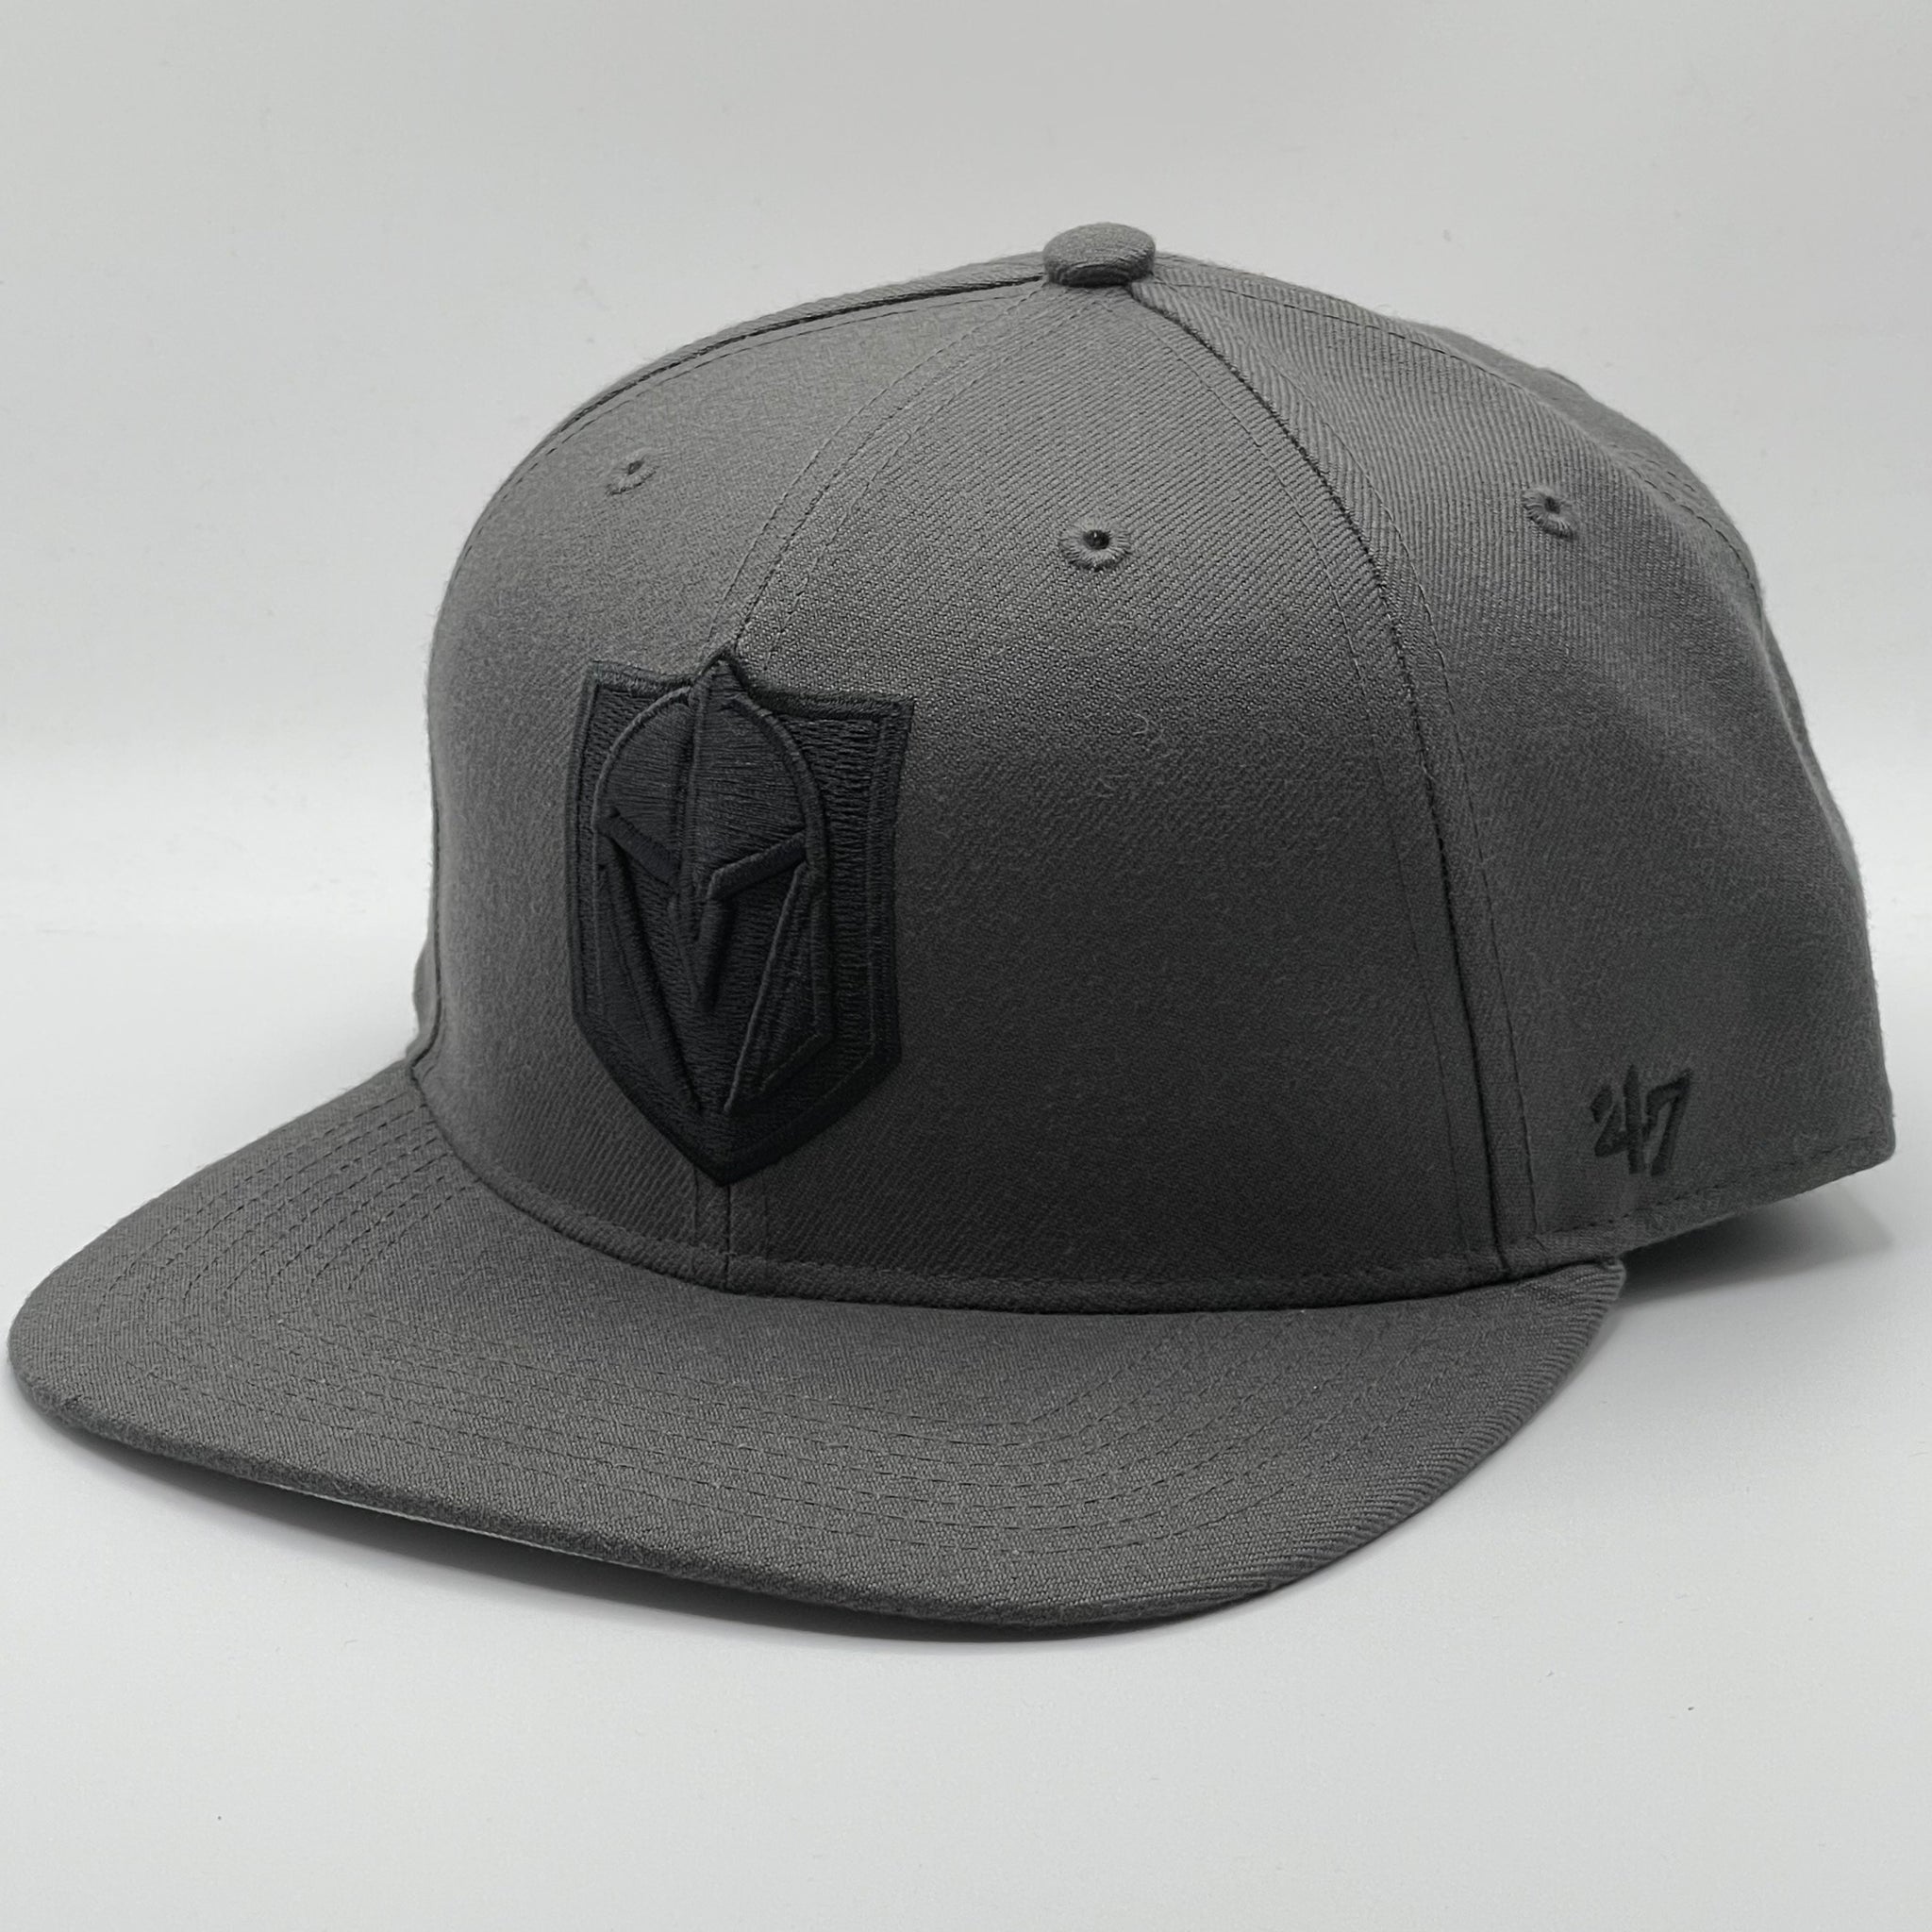 Golden Knights Fitted Black on Gray Tonal Flat Bill Hat